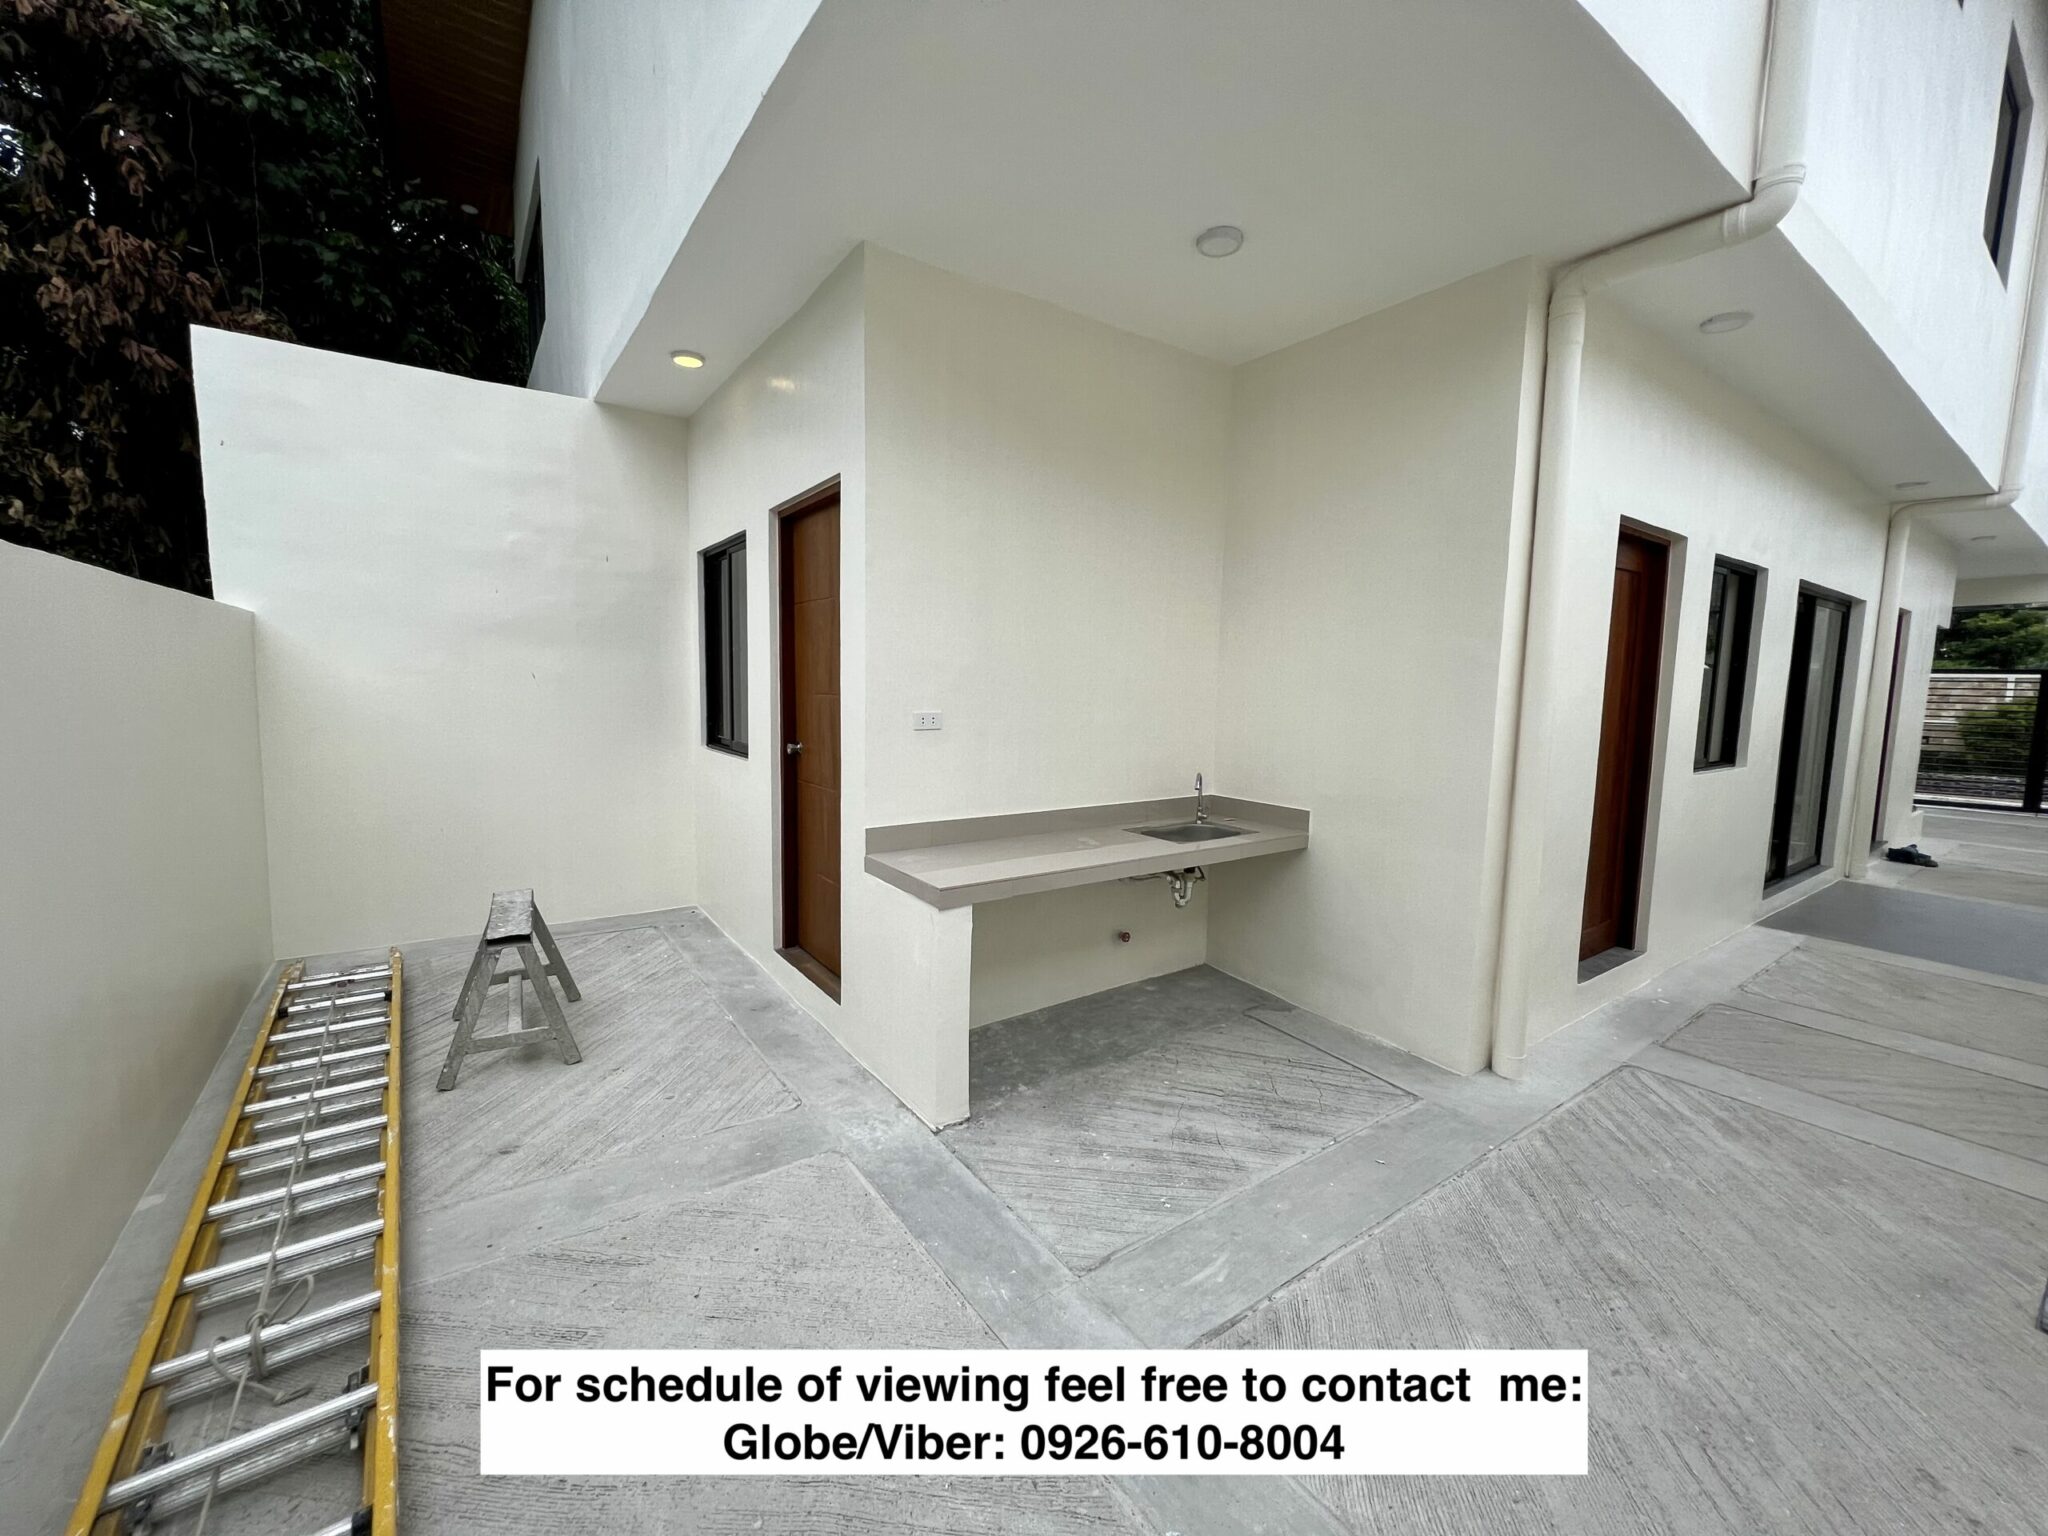 Private: House and Lot For Sale in Cainta Vista Verde 3BR with Maid's room, 2 Car Park near Sta. lucia, LRT2